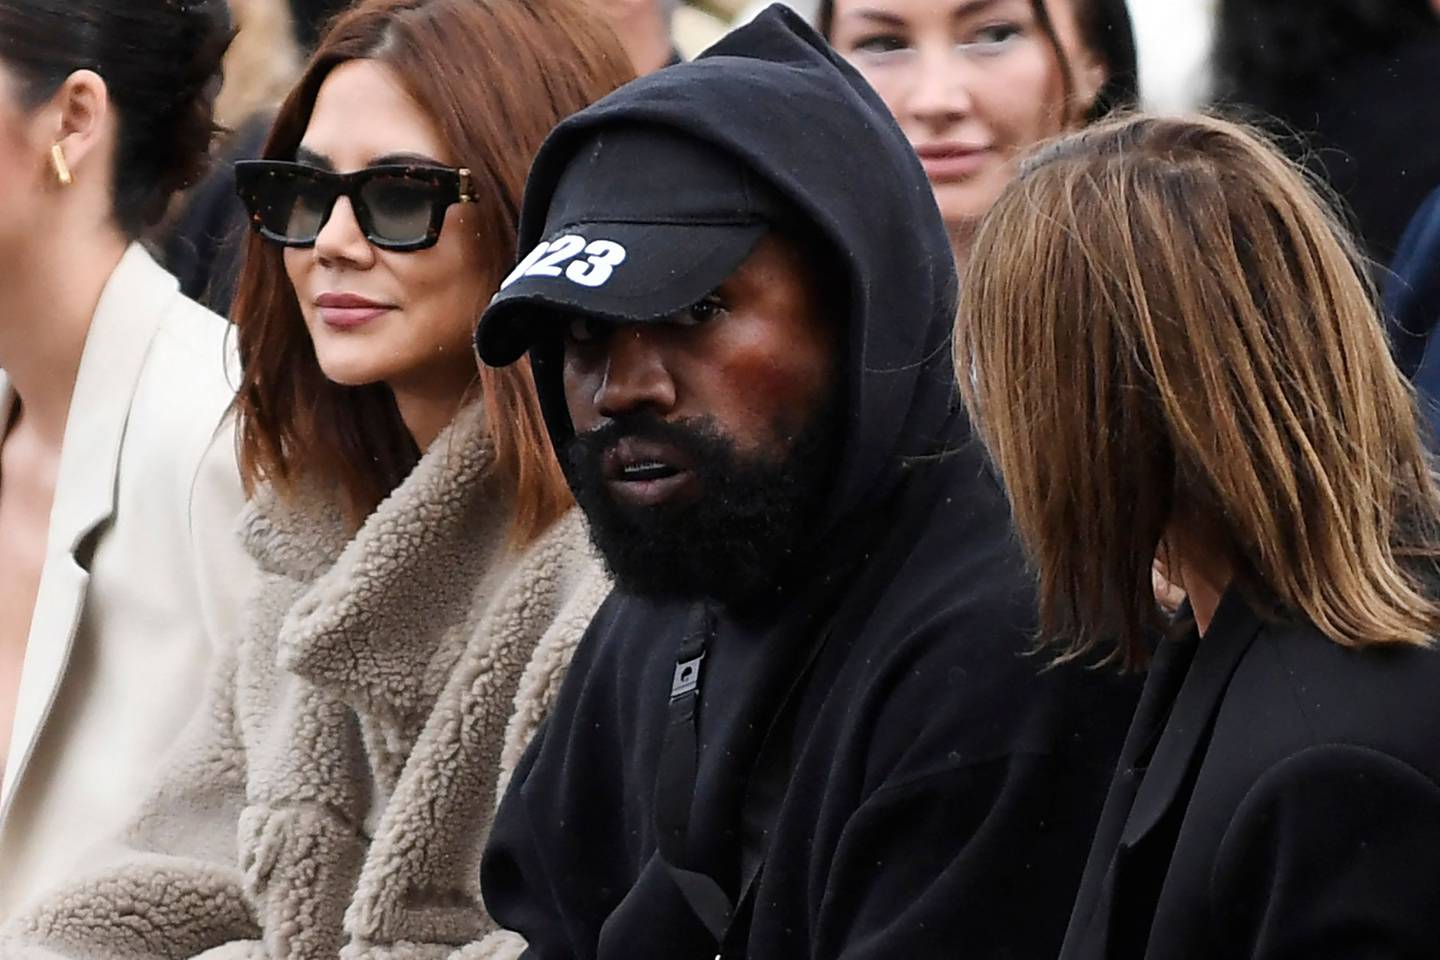 Kanye West, centre, attends the Givenchy spring/summer 2023 fashion show during Paris Fashion Week on October 2, 2022. AFP